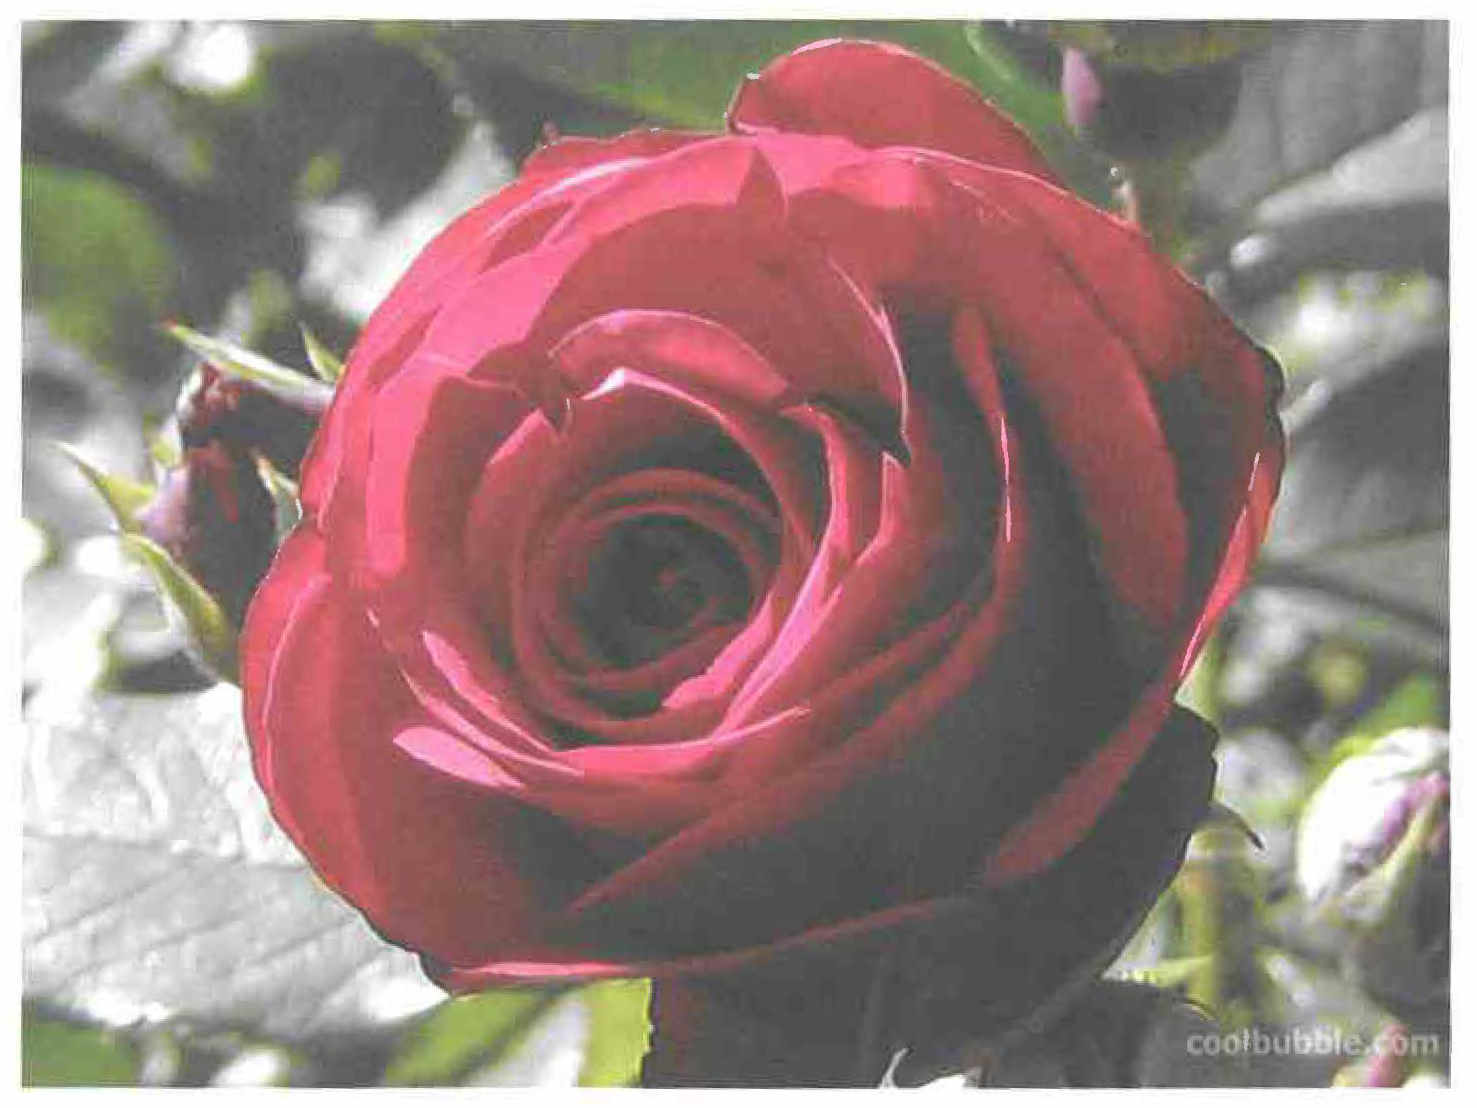 Rose with an embedded shadow of a dophin demonstraing that visual perpection focuses on familiar patterns. From coolbubble.com. Source: S. Few, *Now You See It*, 2009, p. 34.